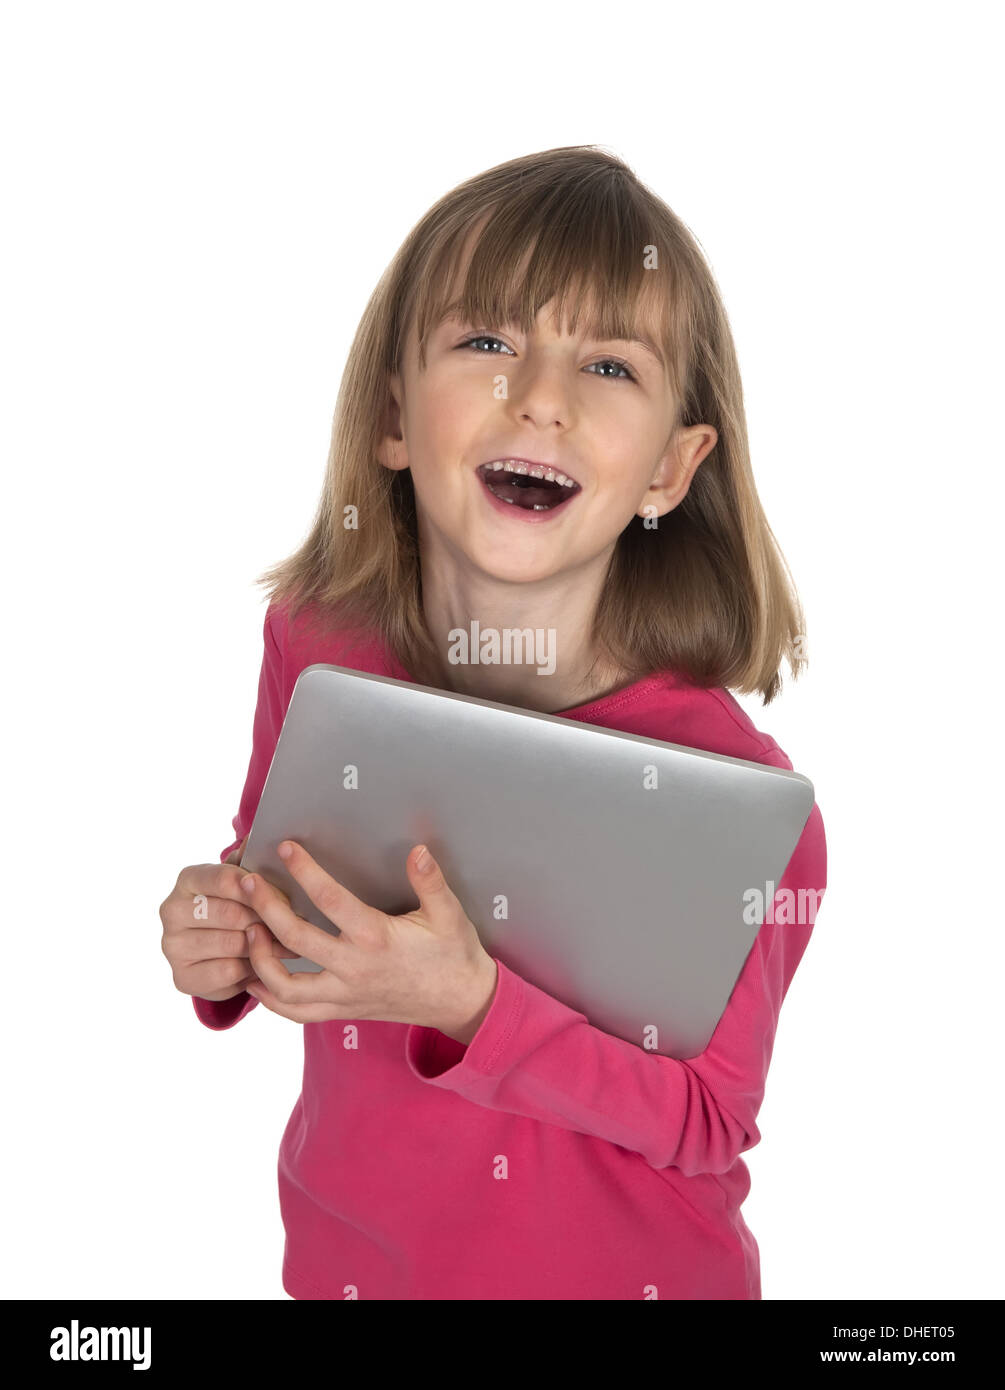 girl with digital tablet Stock Photo